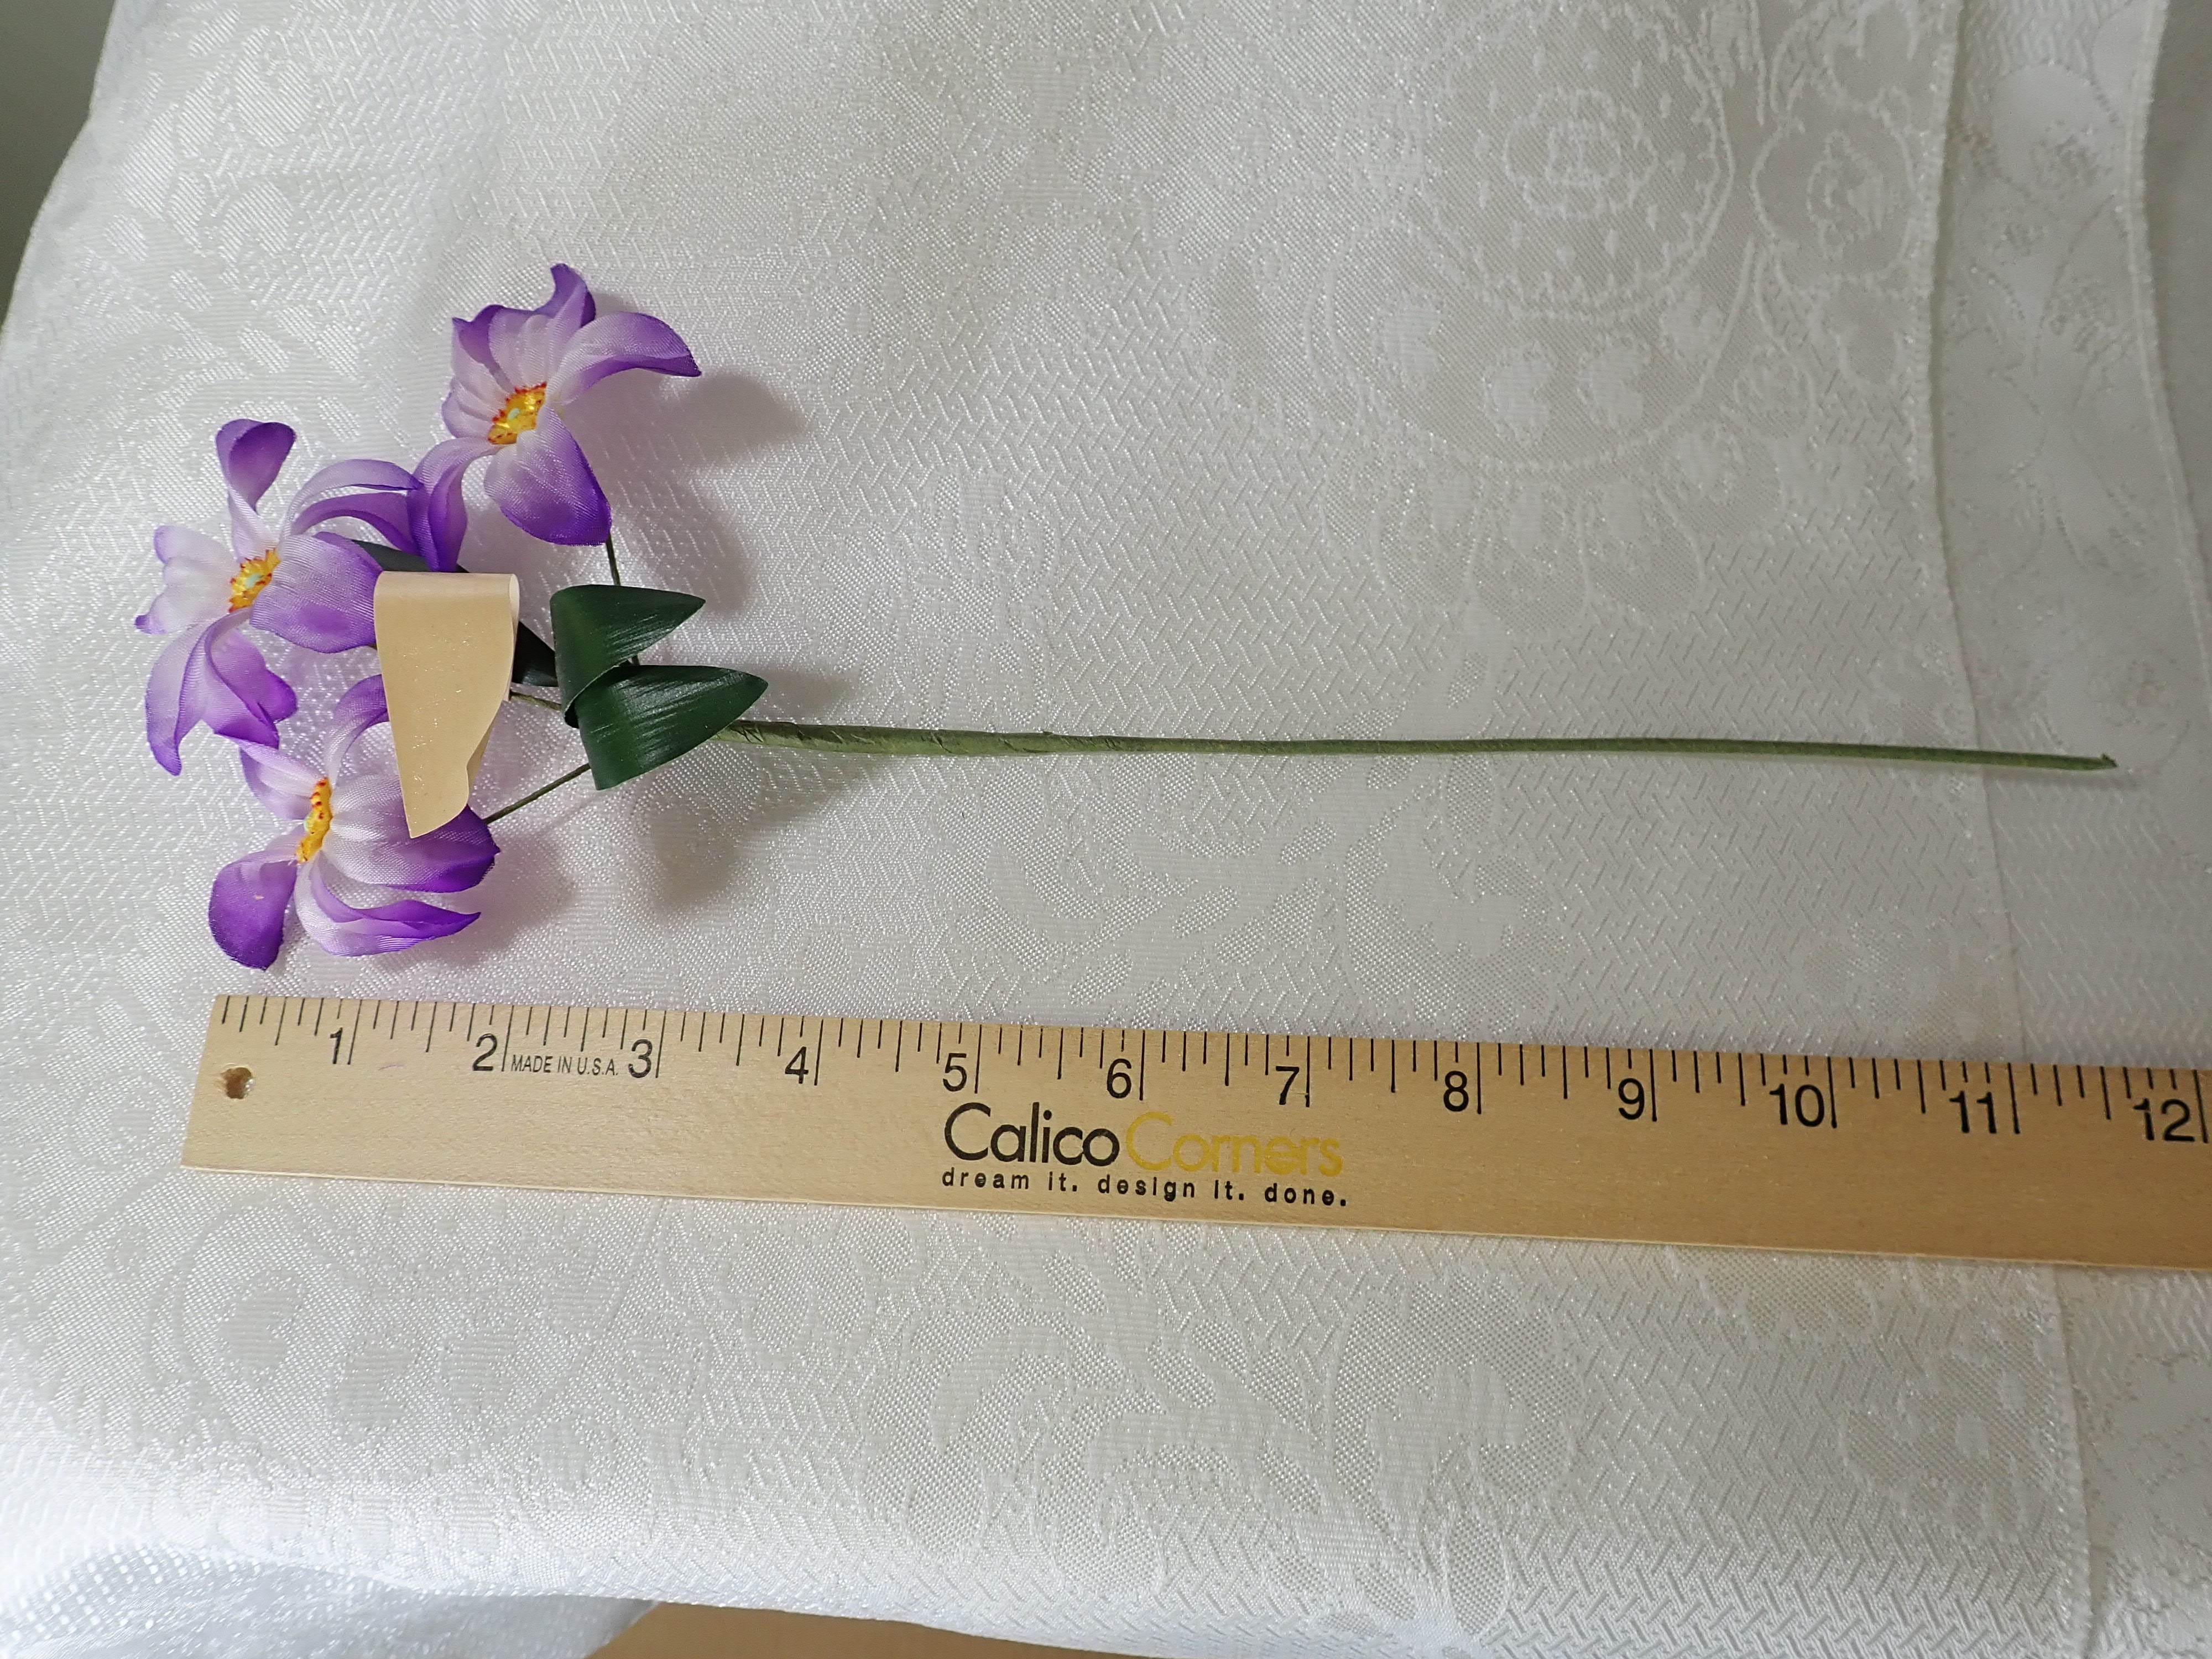 Six stems of Vintage millinery flowers. Purple anemones with yellow center and green leaves.